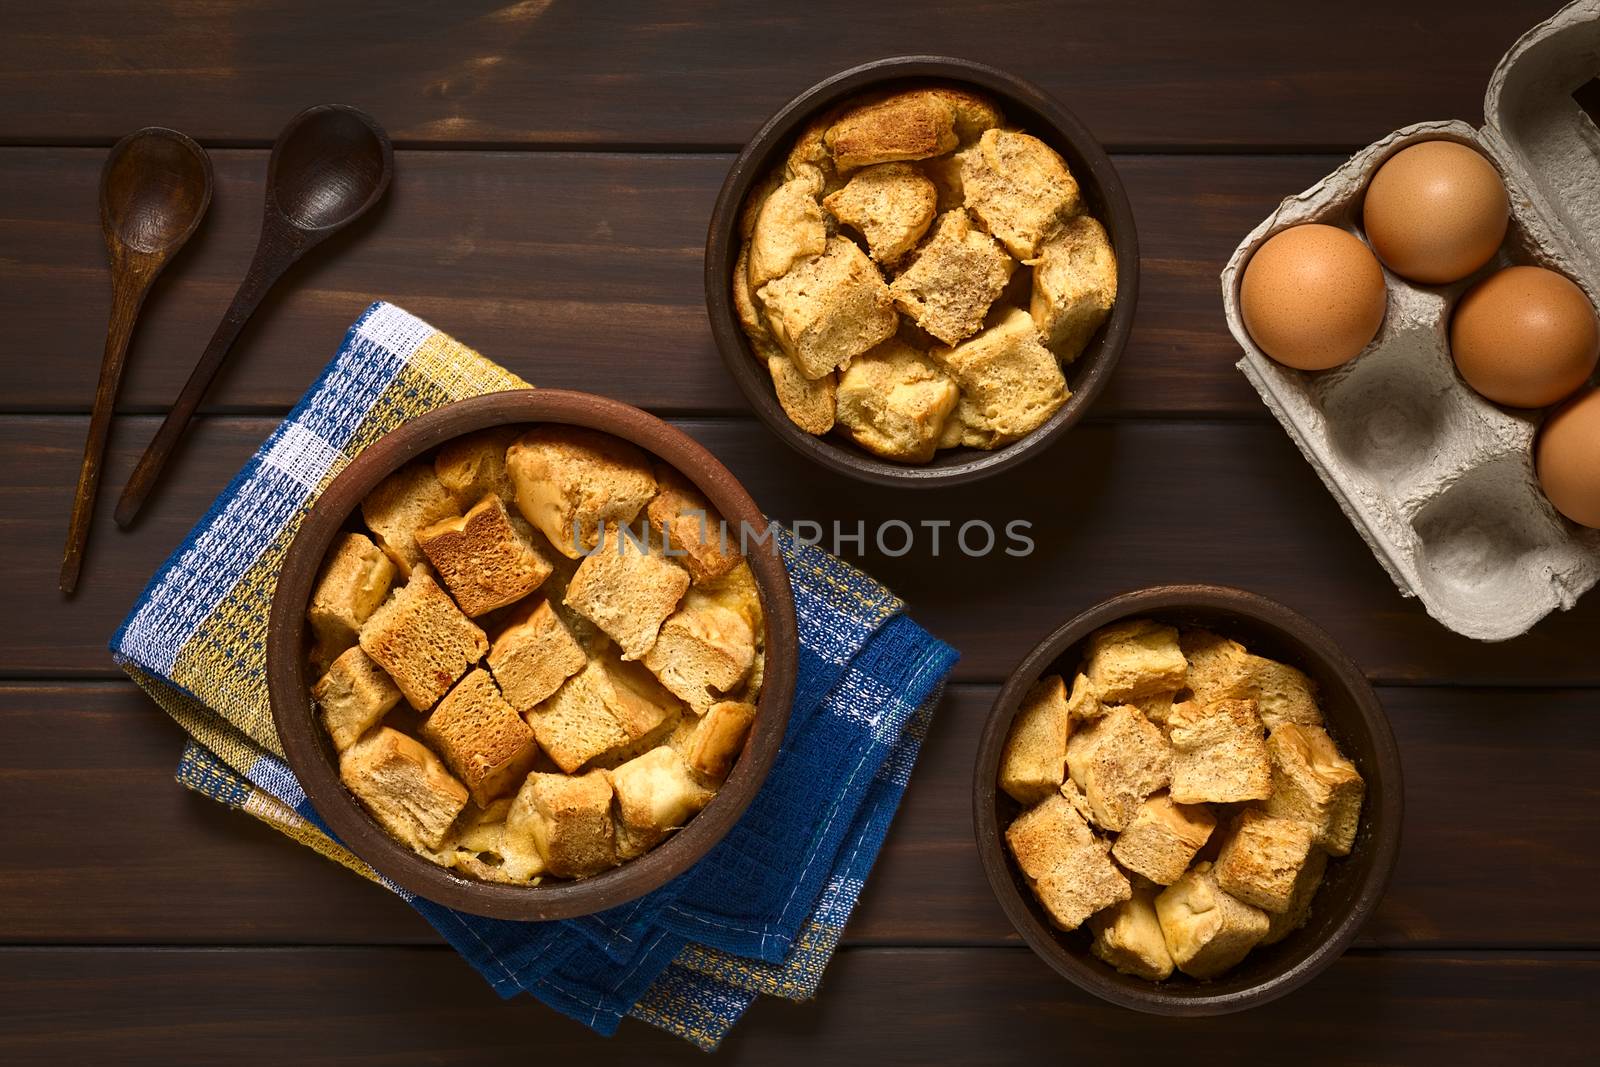 Overhead shot of three rustic bowls of bread pudding made of diced stale bread, milk, egg, cinnamon, sugar and butter, photographed on dark wood with natural light